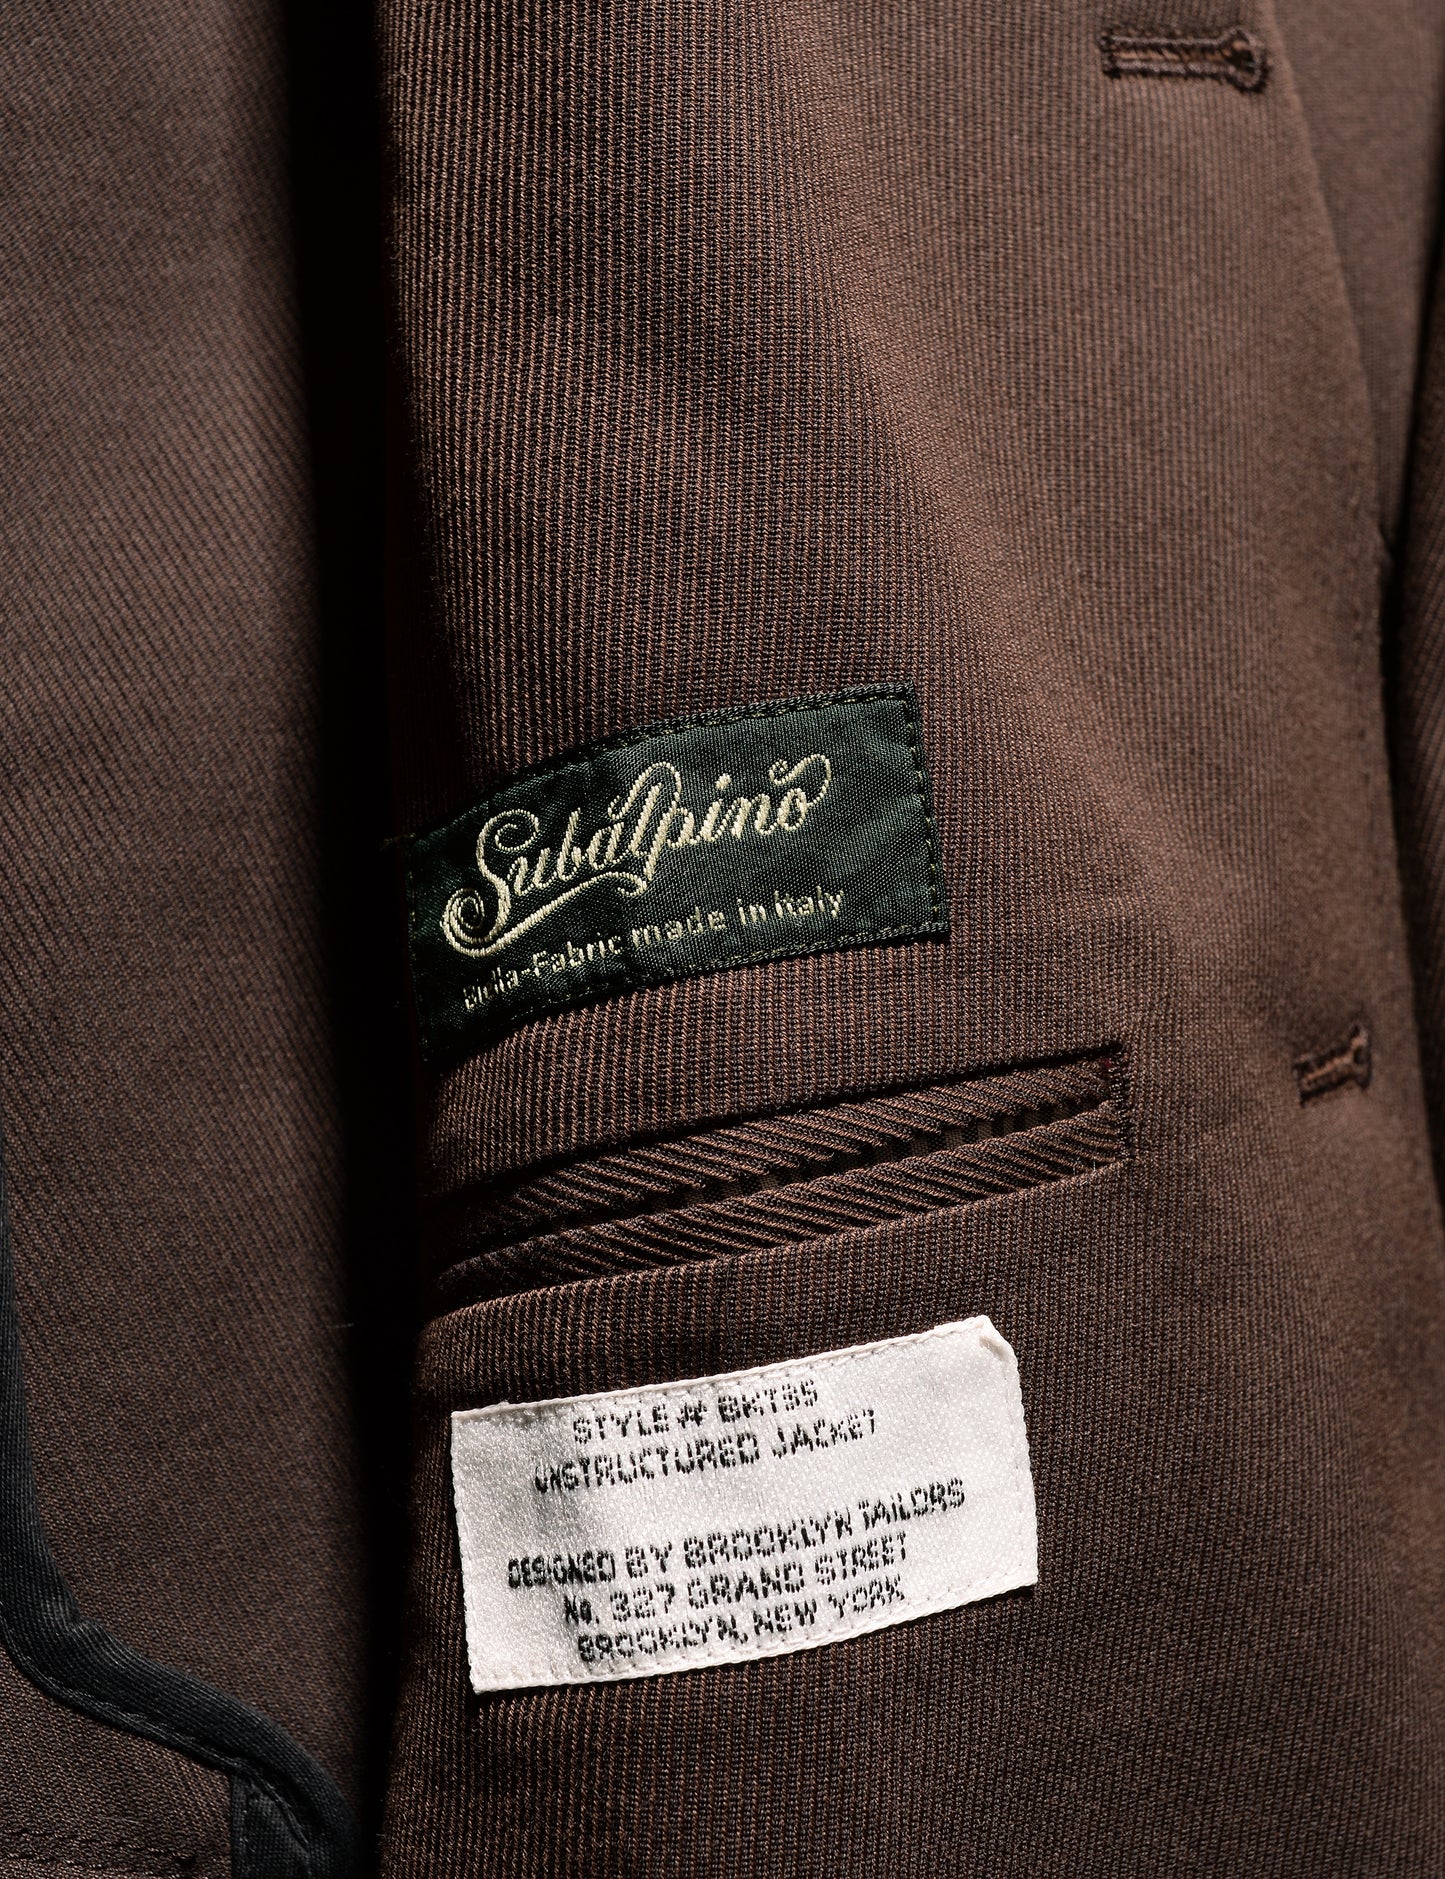 BKT35 Unstructured Jacket in Cavalry Twill - Rosewood